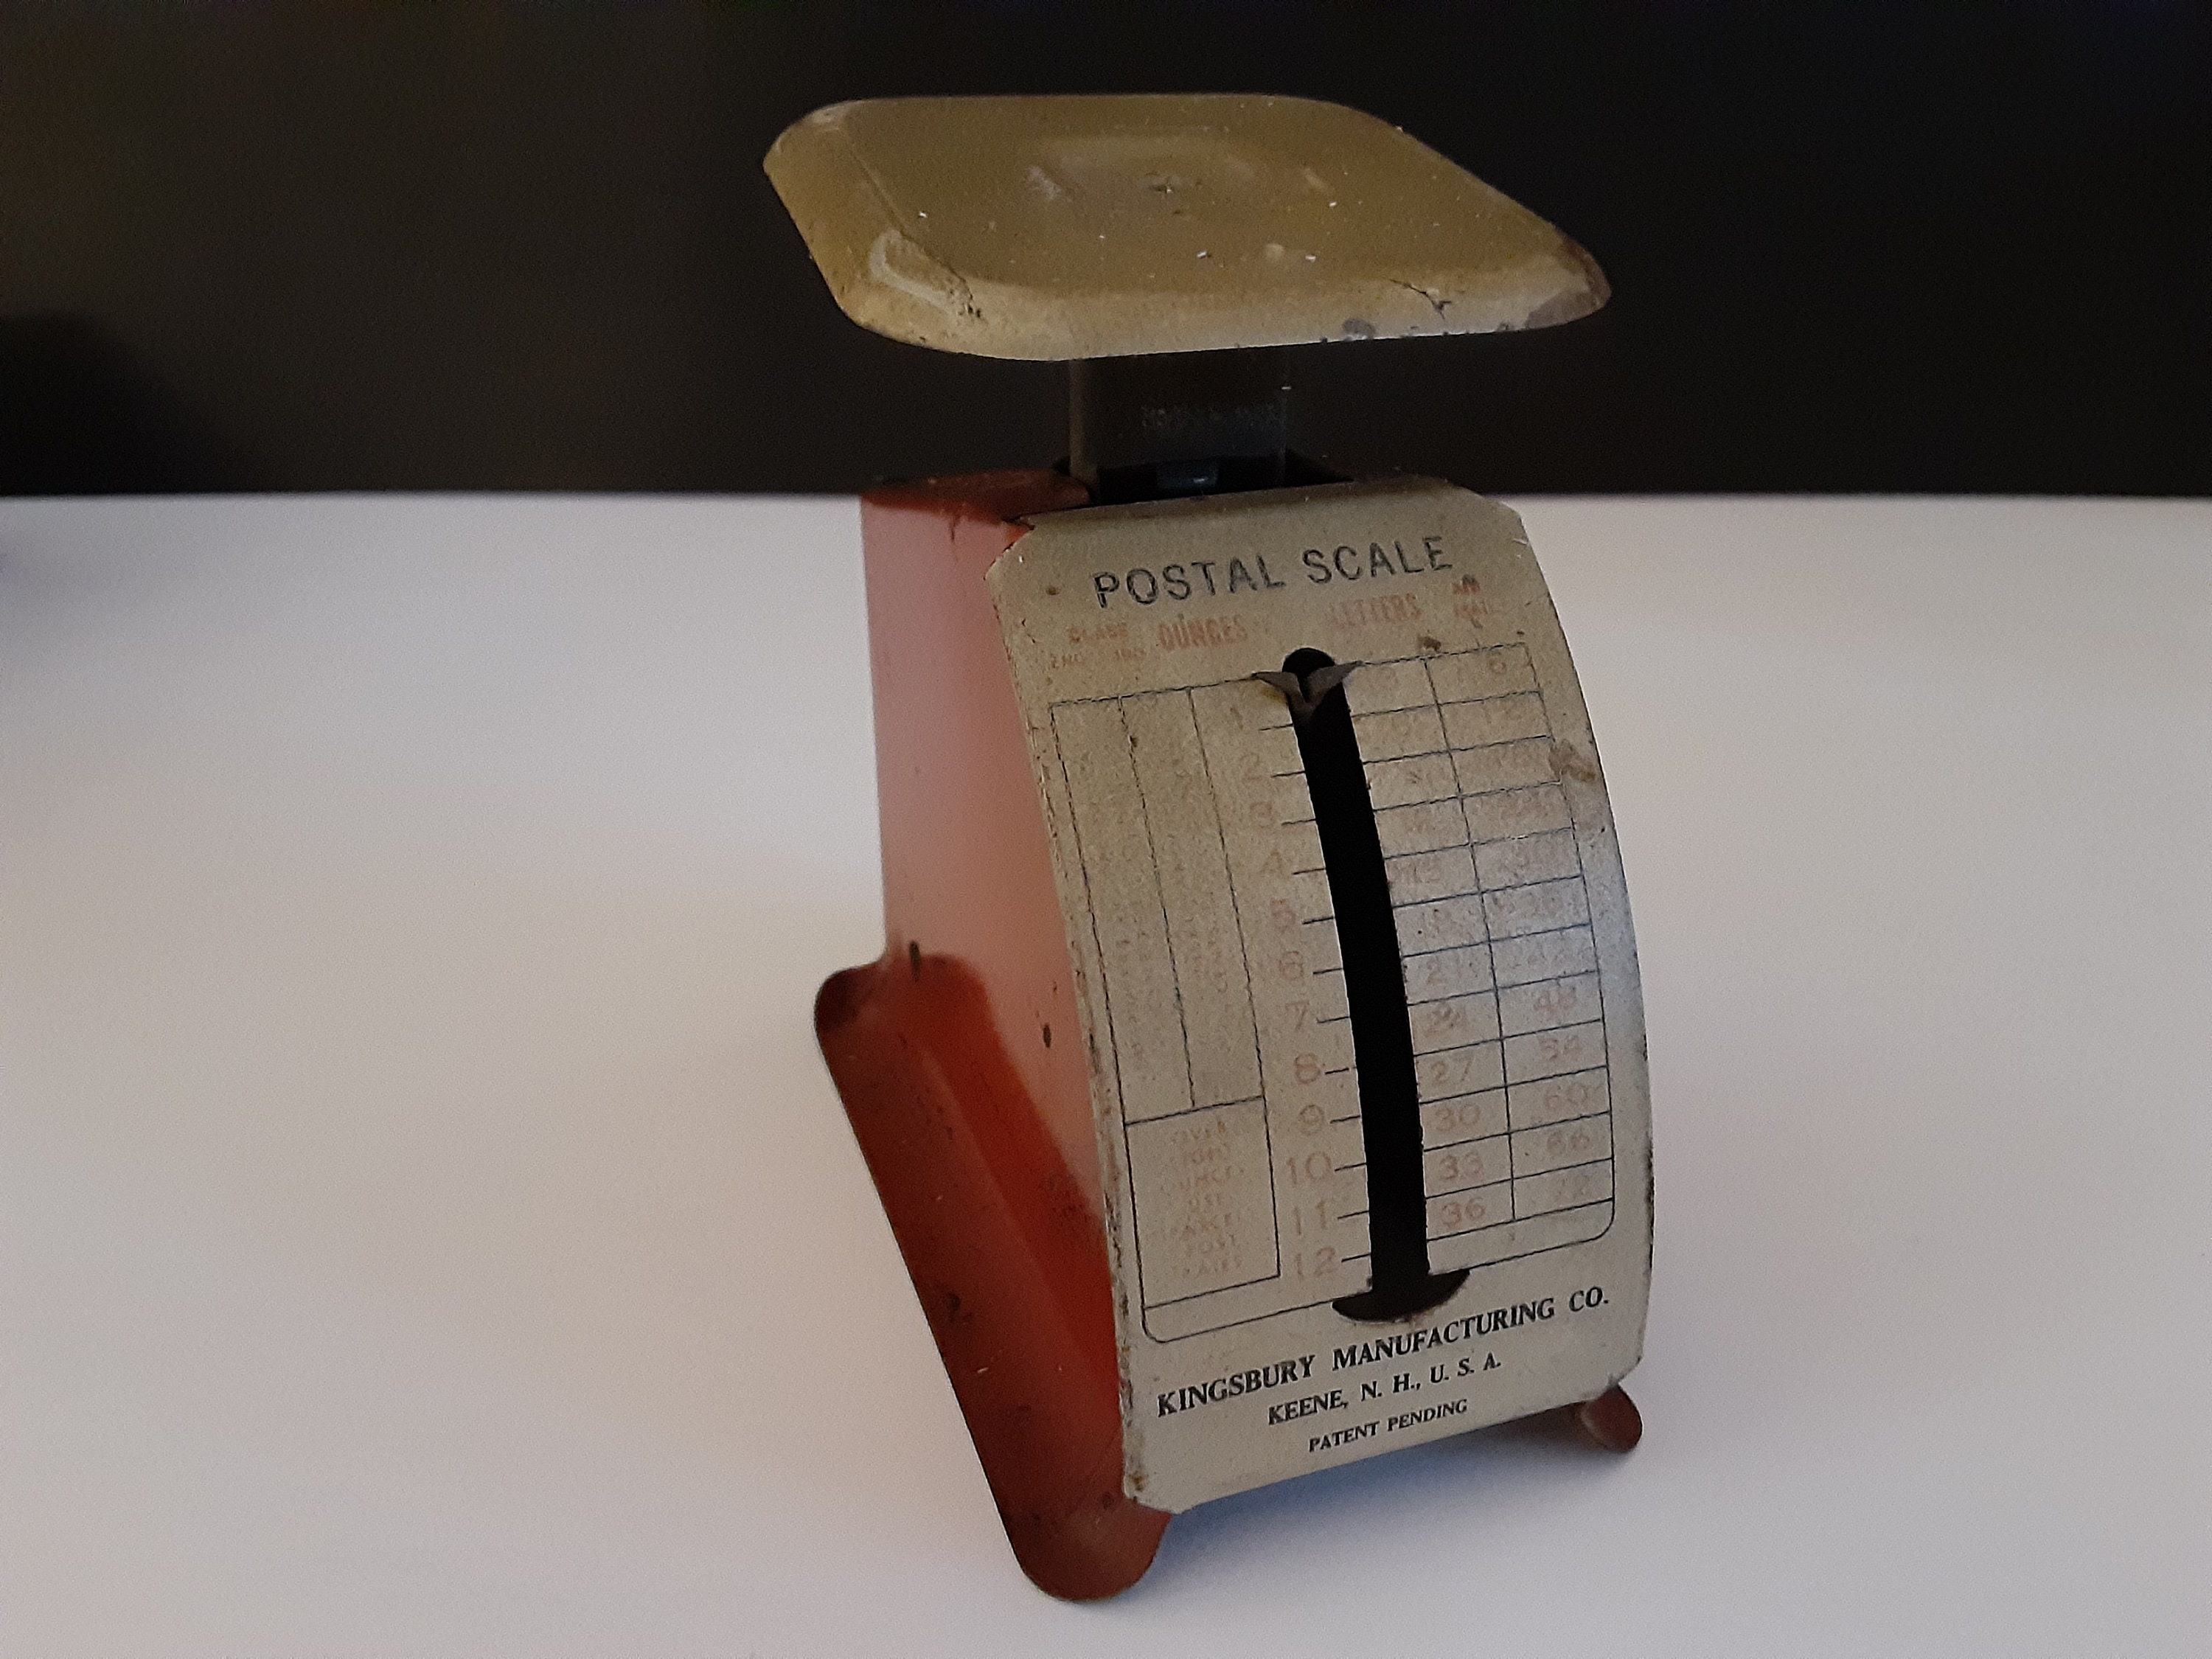 Old Antique THE SUPERIOR POSTAL SCALE 4 LBS Capacity Table Top POSTAL SCALE